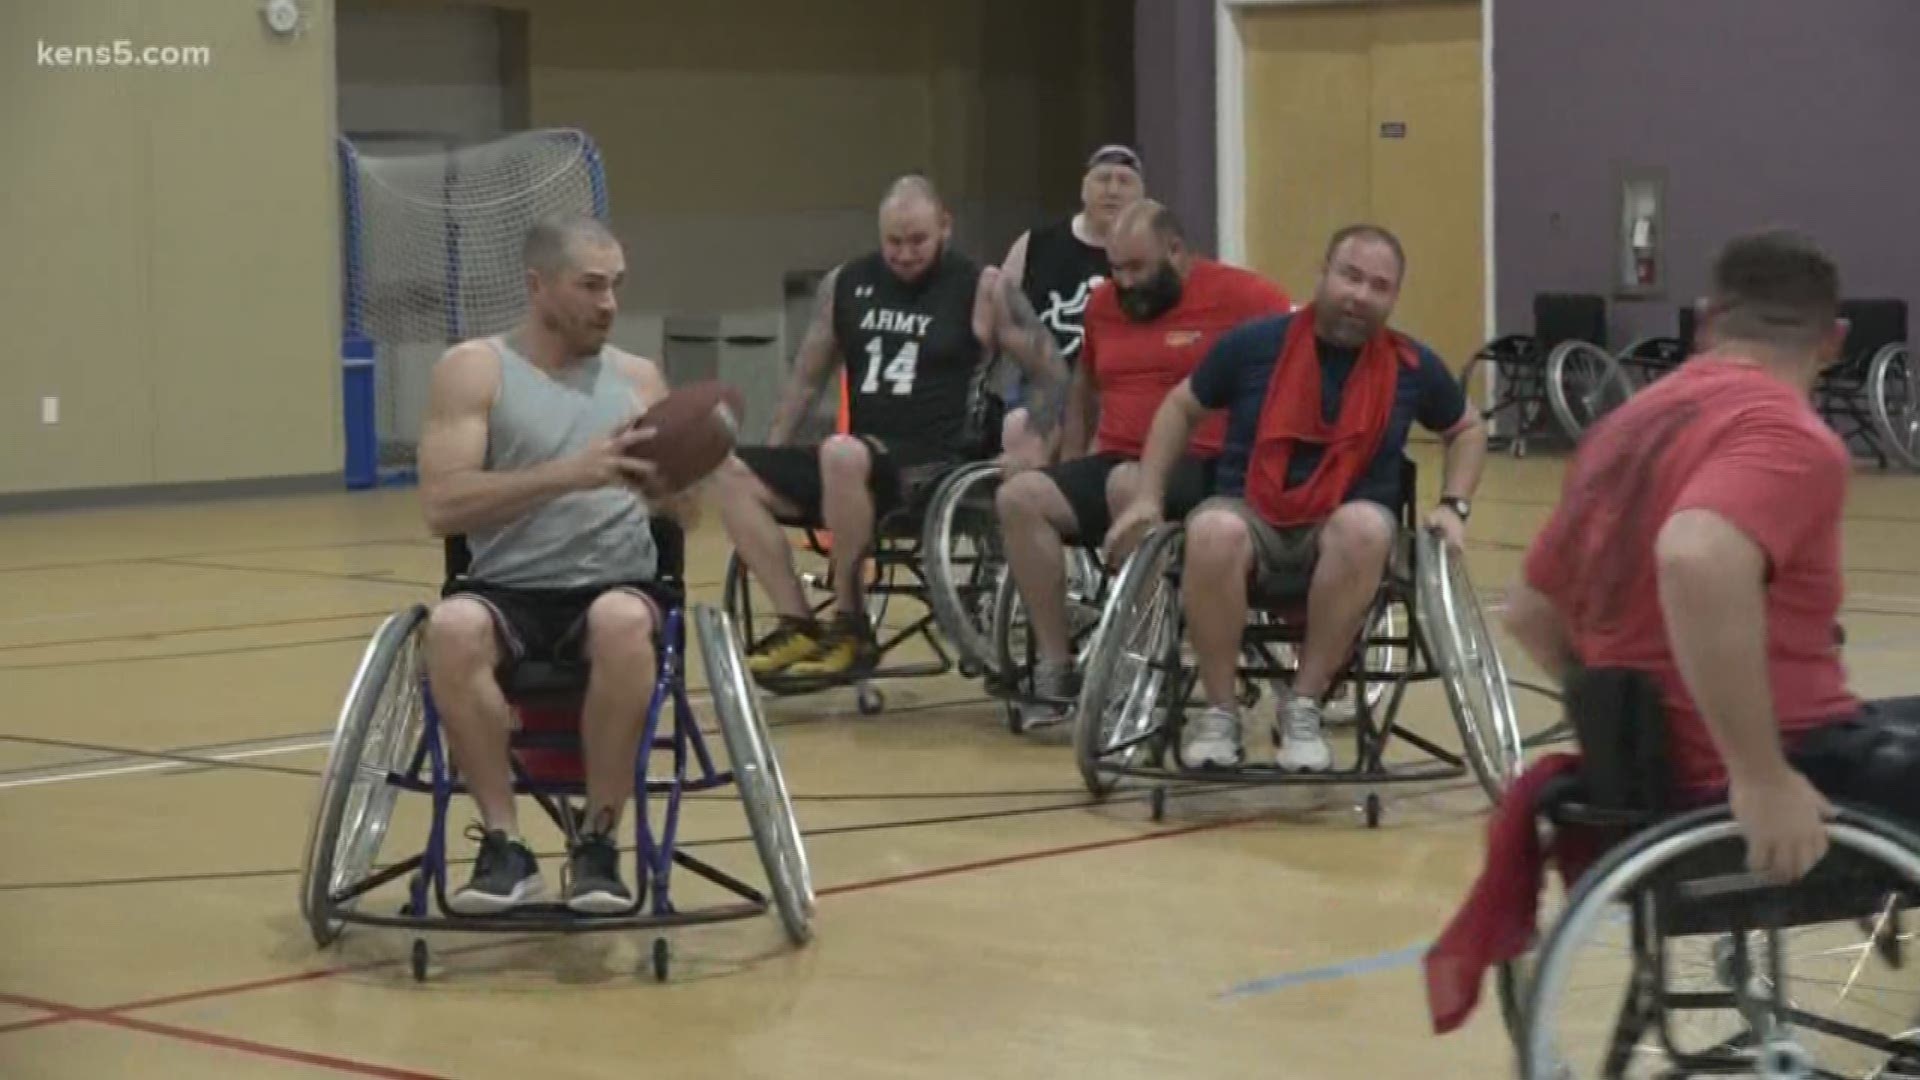 Wounded Warriors come together on four wheels to rebuild the brotherhood and challenge each other on and off the court.